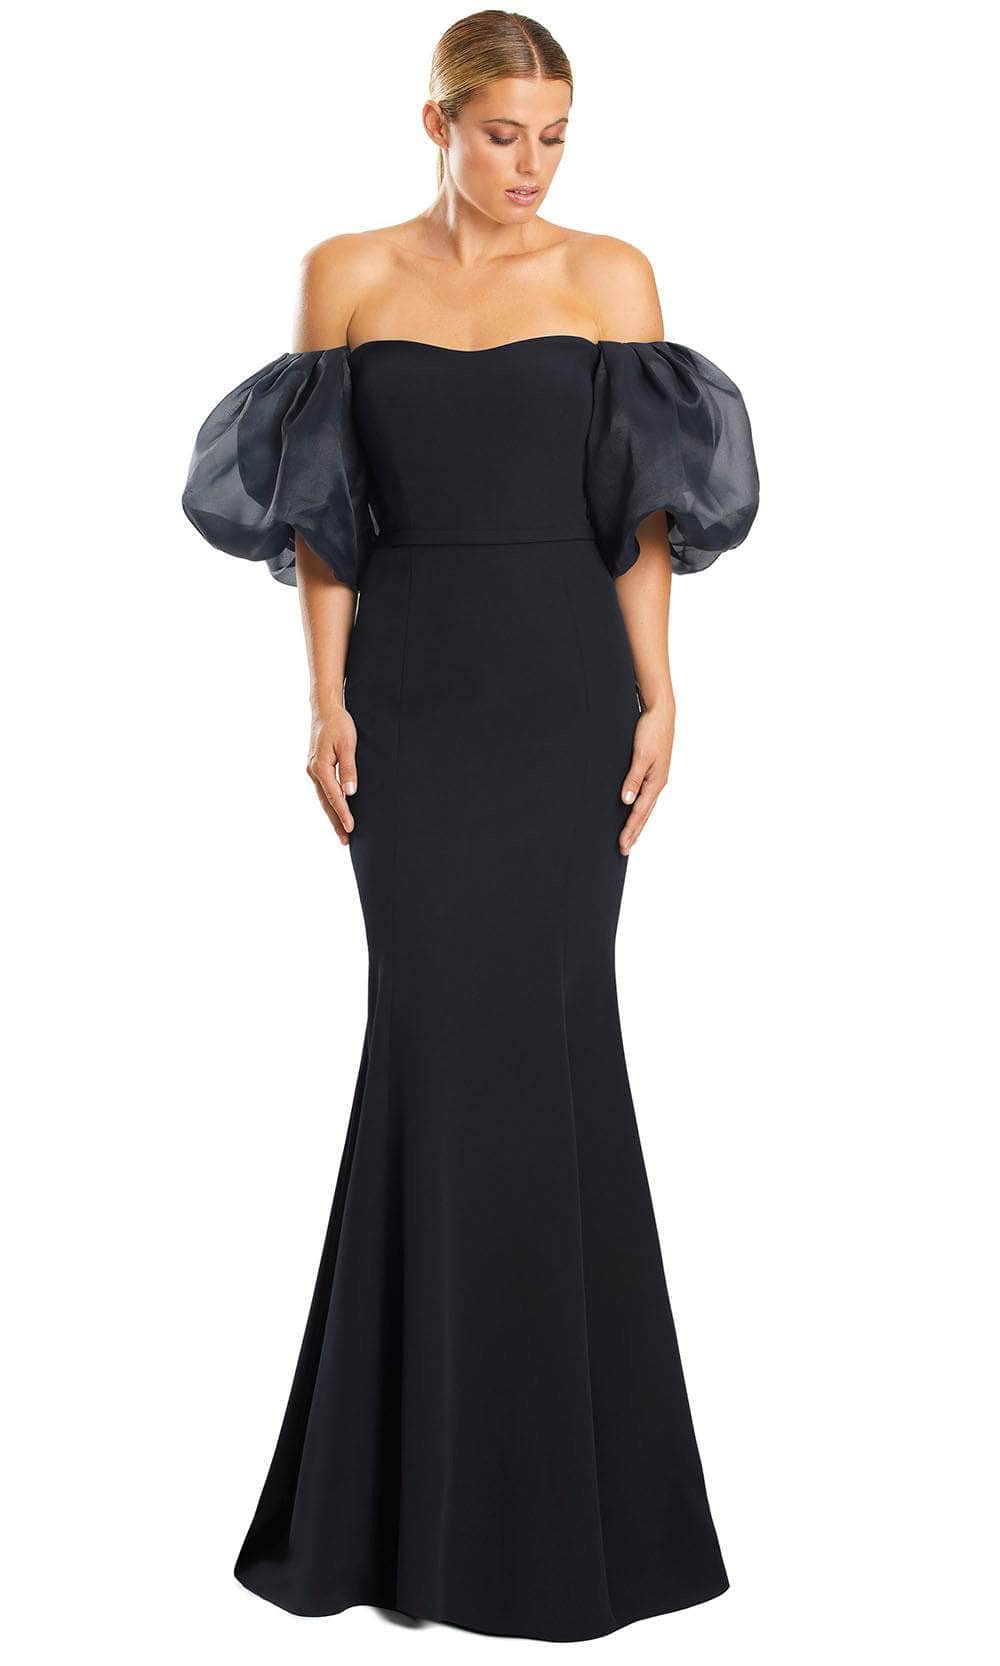 Image of Alexander by Daymor 1870F23 - Puff Sleeve Trumpet Evening Gown